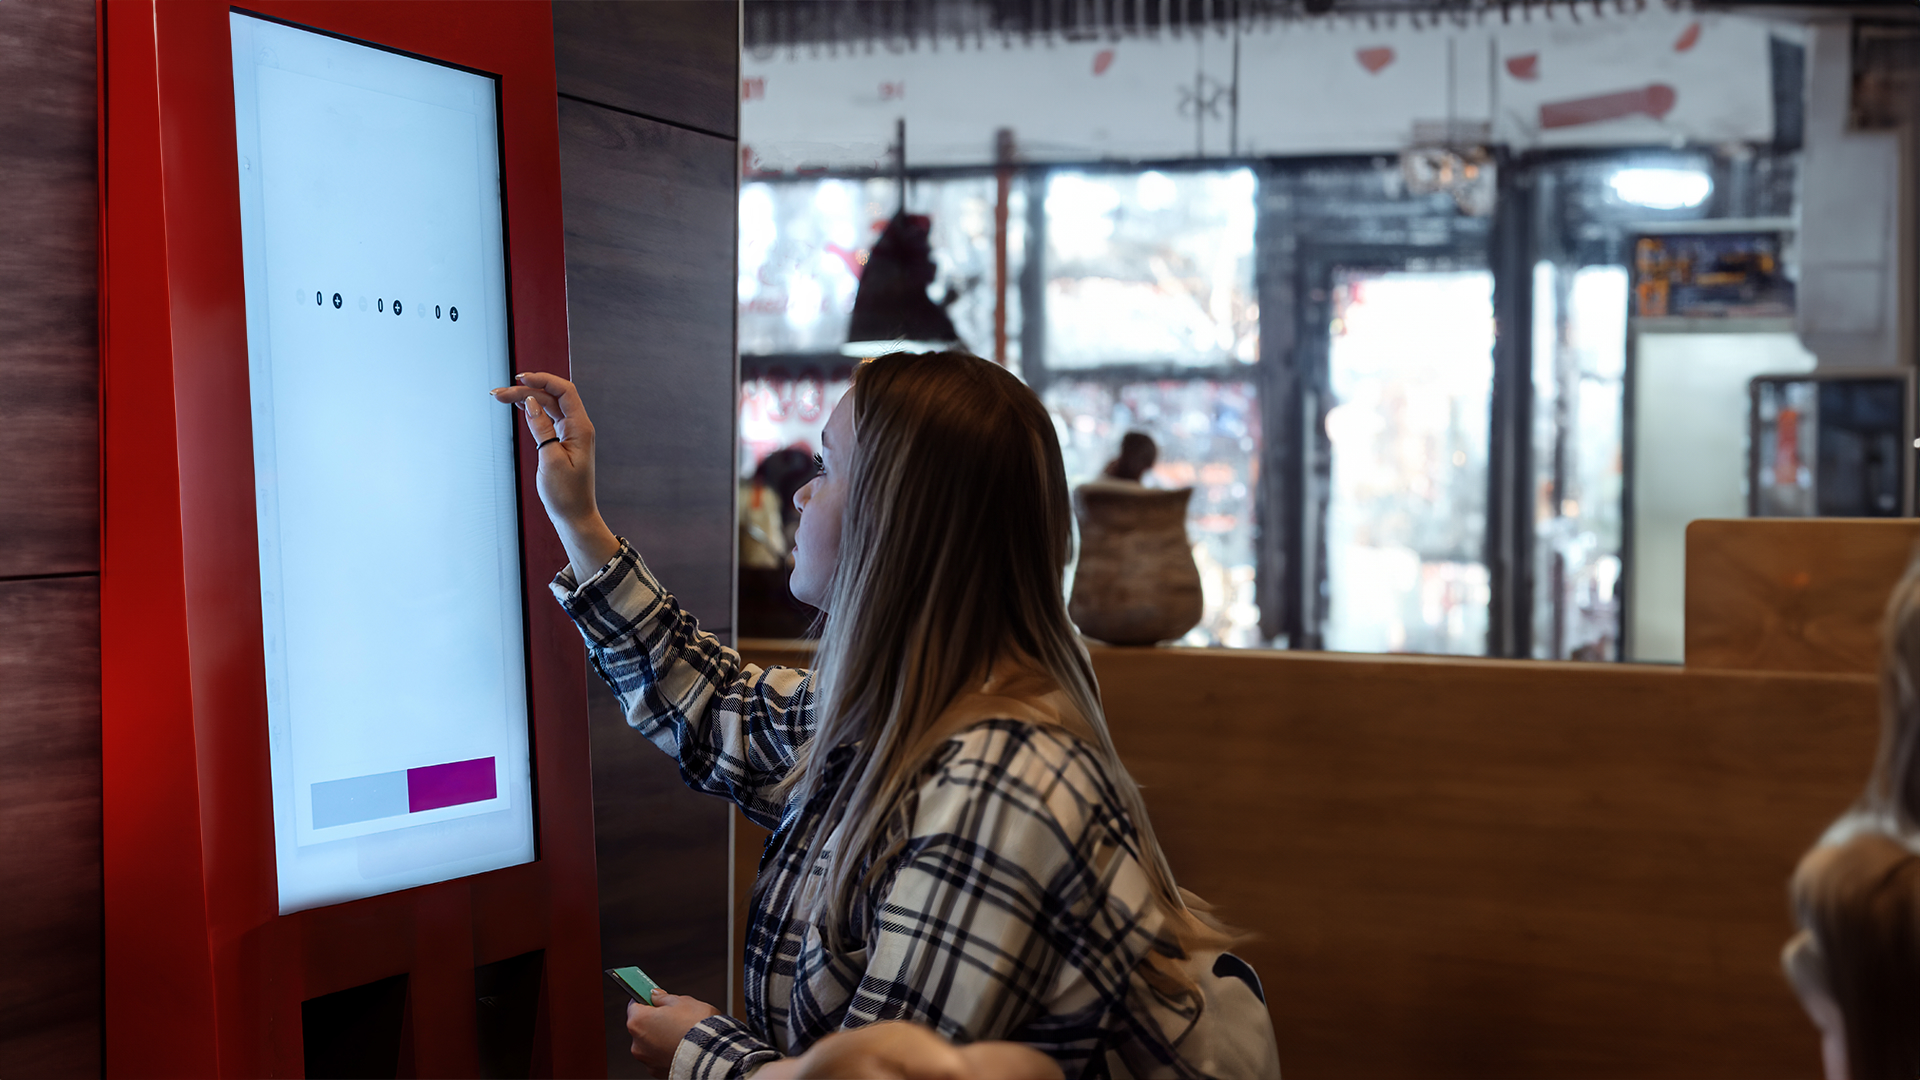 Digital signage integrated with a hospitality app